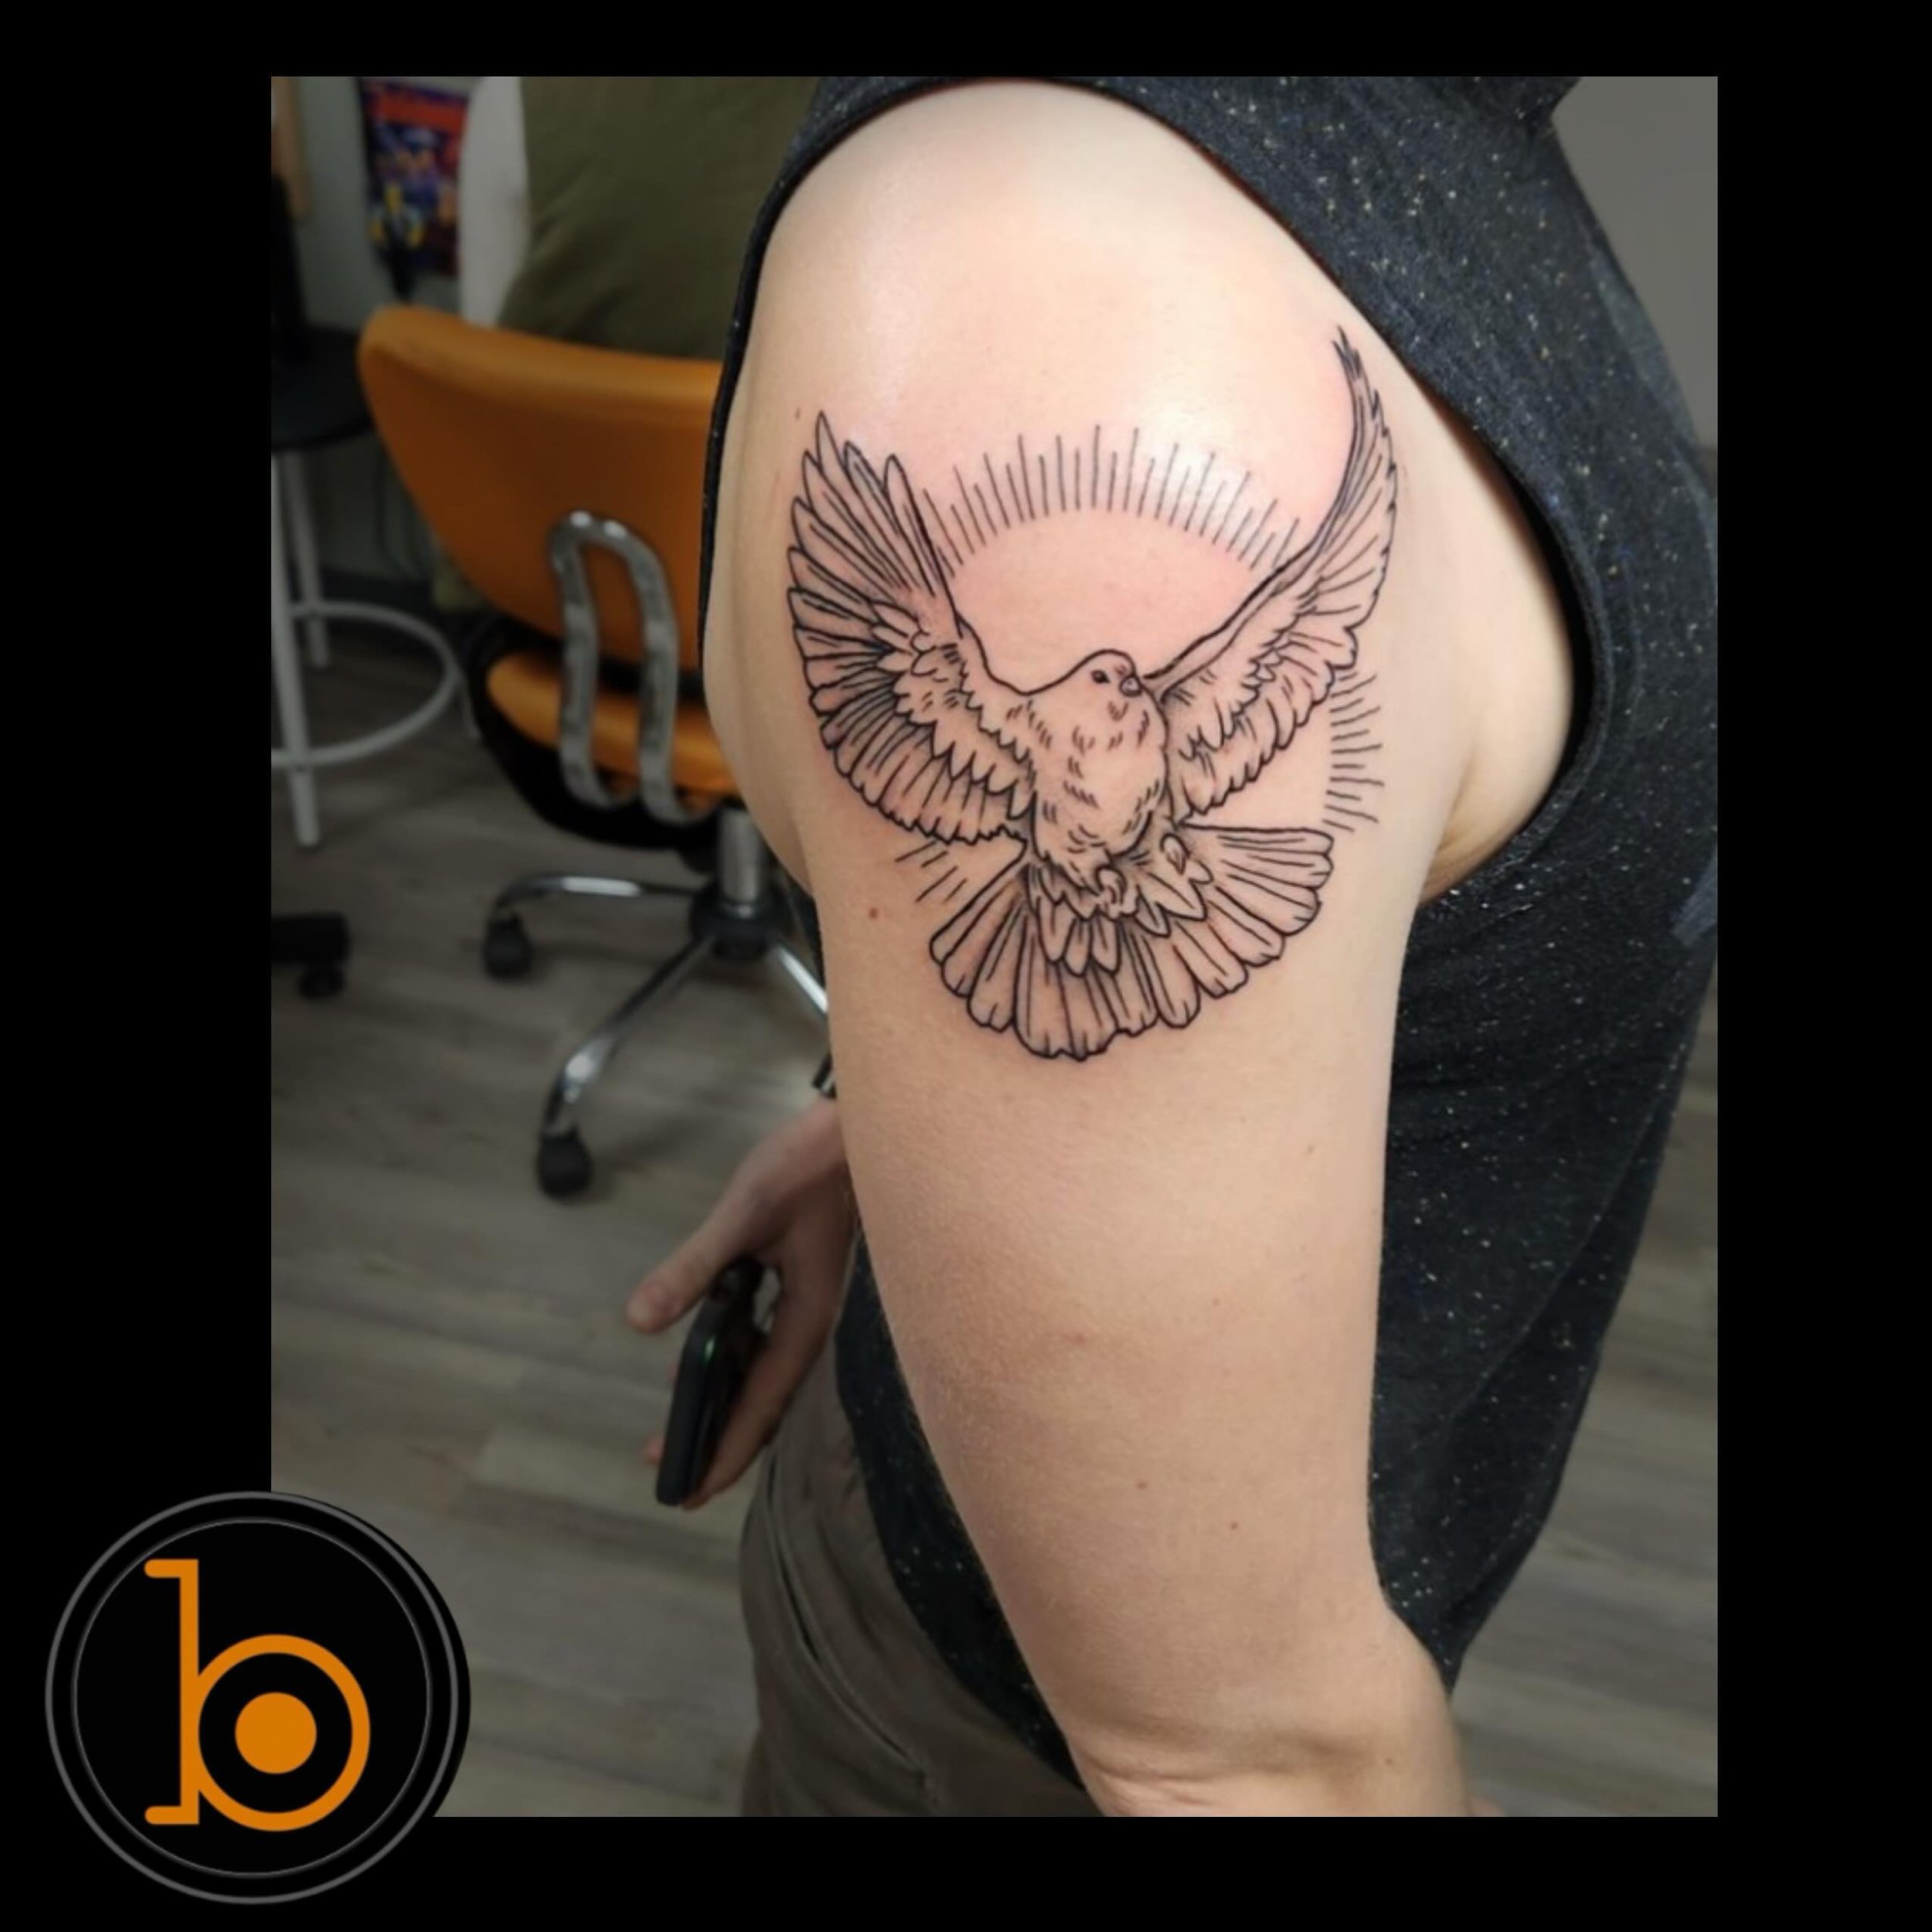 🎶I&rsquo;m like a biiiiird&hellip;.🎶 by resident artist @steevdraws 
➖➖➖➖➖➖➖➖➖➖➖➖➖➖➖➖➖
Blueprint Gallery
138 Russell St
 Hadley MA 01035
📱(413)-387-0221 
WALK-INS WELCOME 
🕸️ www.blueprintgallery.com 🕸️
⬇️⬇️⬇️⬇️⬇️⬇️⬇️⬇️⬇️⬇️⬇️⬇️⬇️
Made using mate